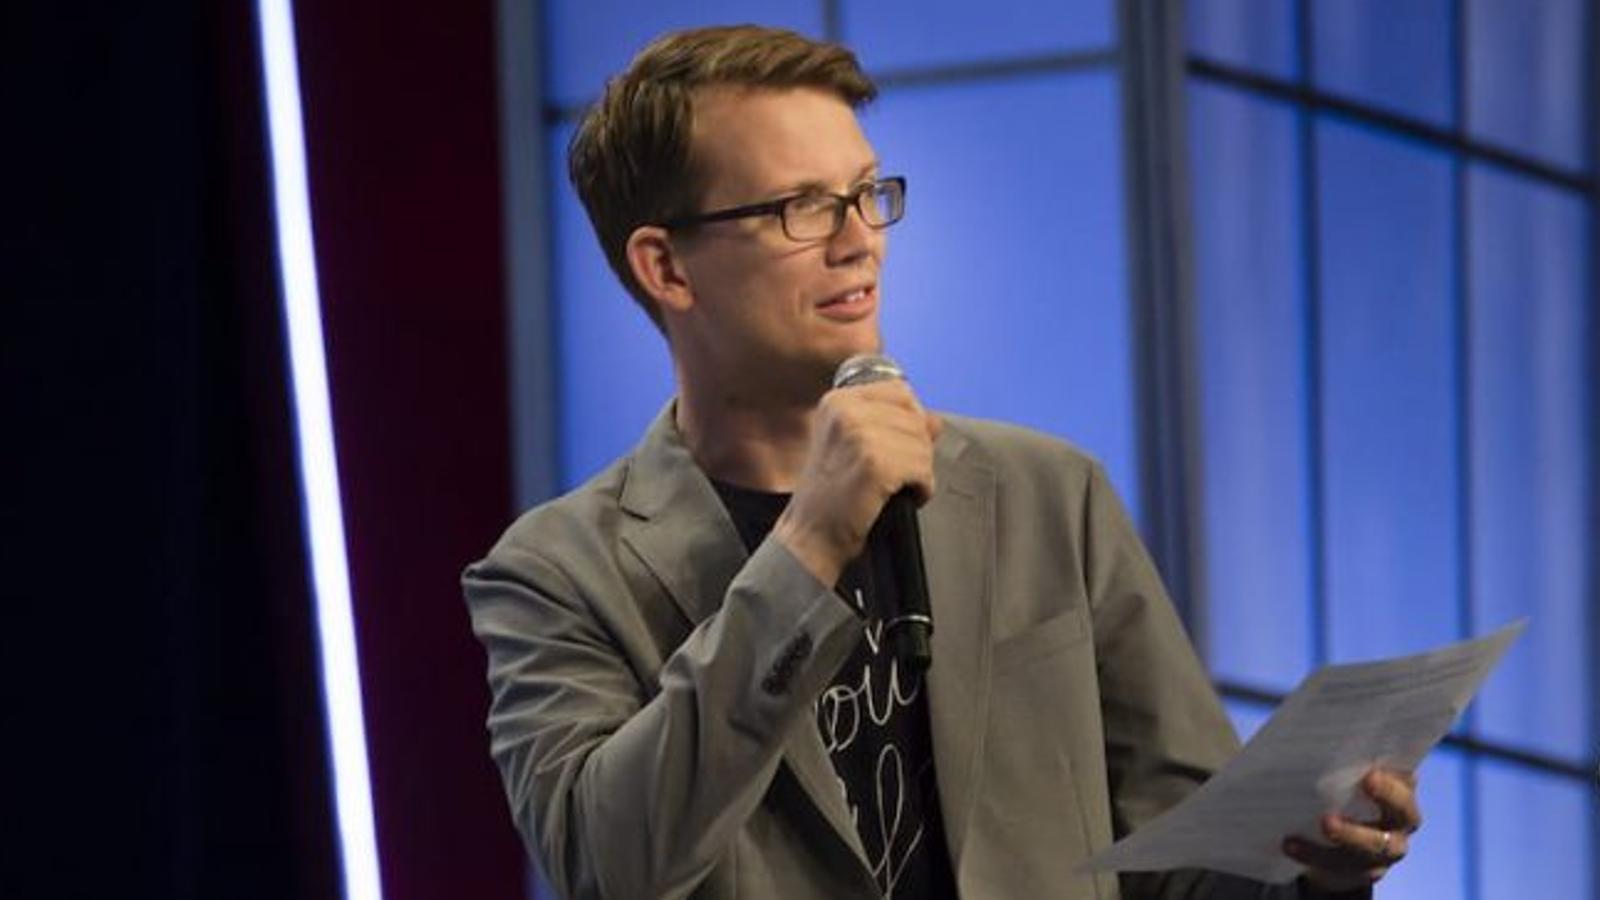 Hank Green on stage at VidCon.